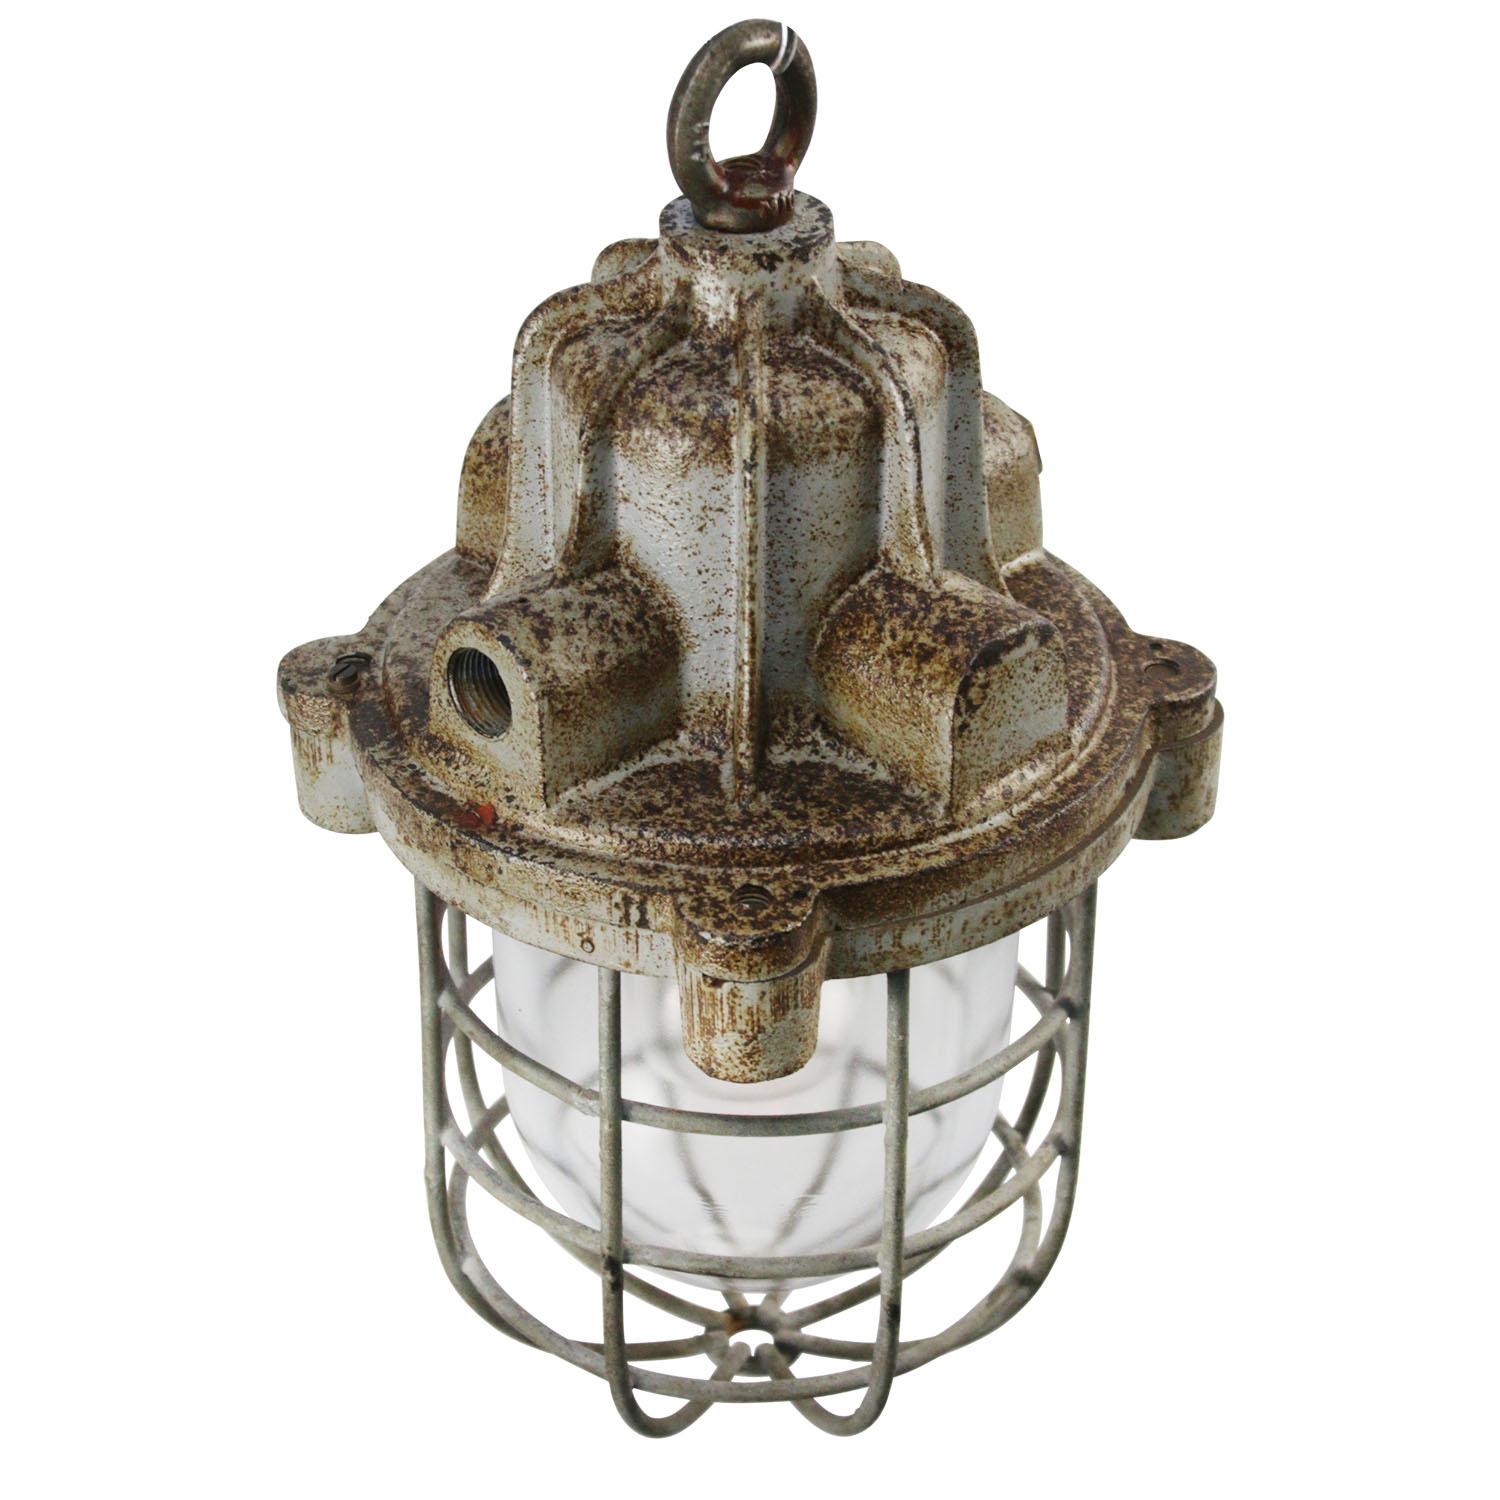 Industrial hanging lamp by Industria Rotterdam
cast iron clear glass

Weight 10.00 kg / 22 lb

Priced per individual item. All lamps have been made suitable by international standards for incandescent light bulbs, energy-efficient and LED bulbs.